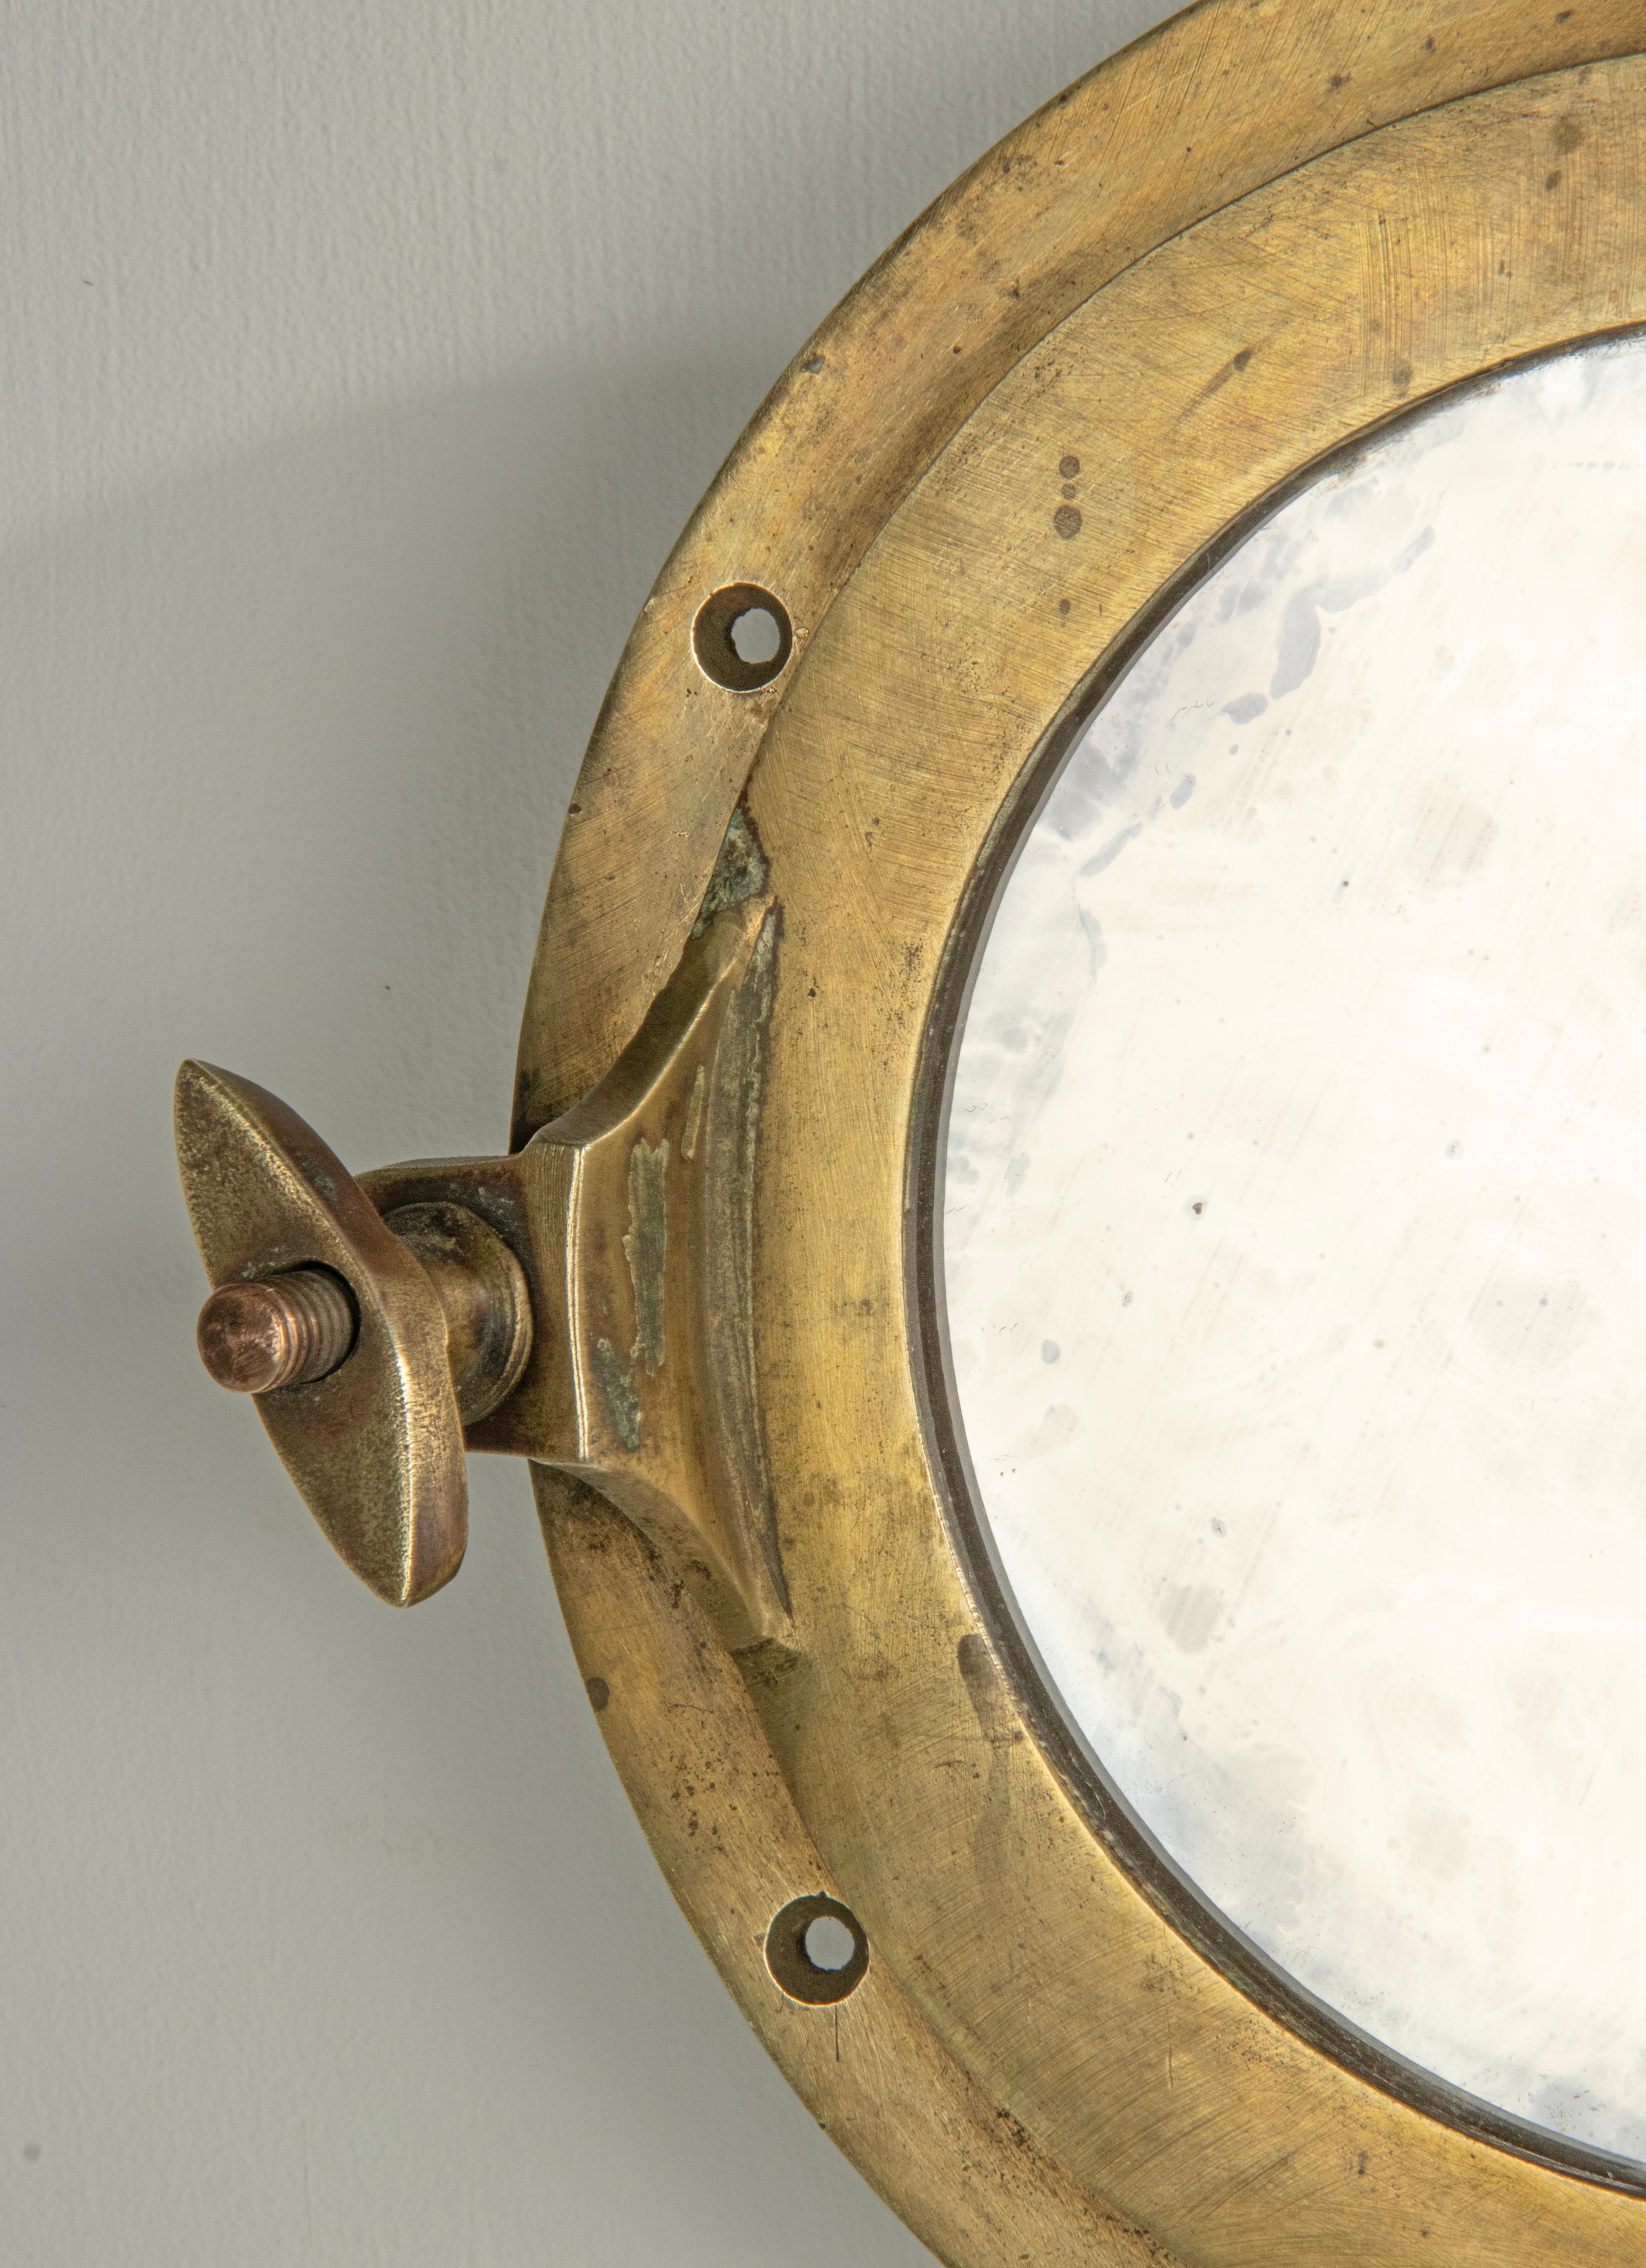 A small antique ship porthole wall mirror made of brass. A mirror glass has been placed inside. The whole has a beautiful old patina. The original glass is removed and replaced by a mirror glass. Some wear stains on the mirror glass. This maritime